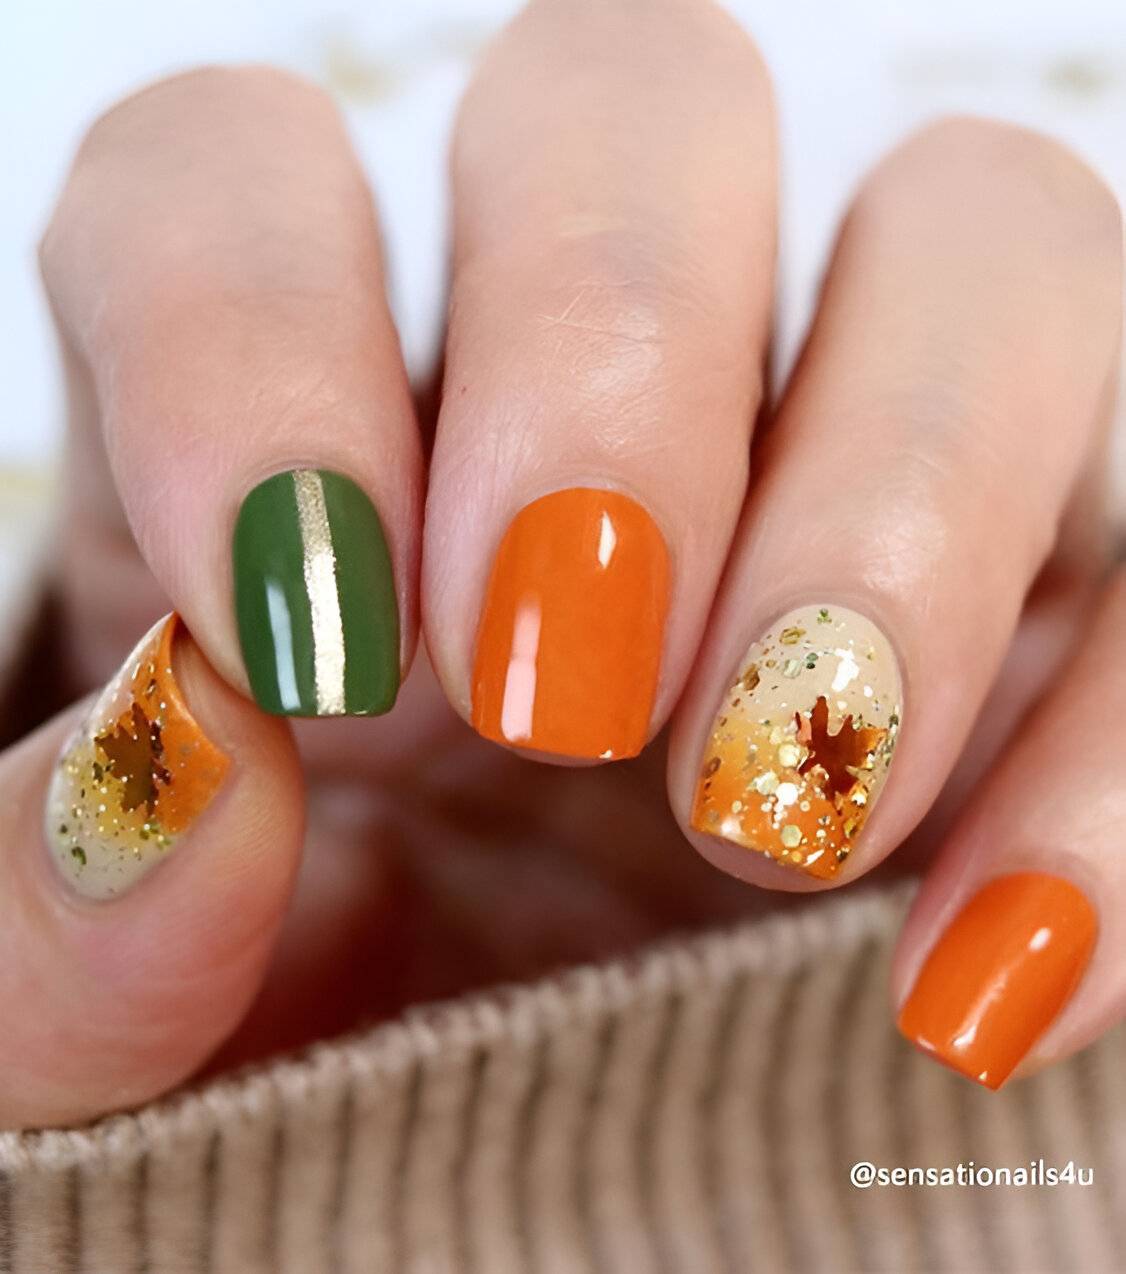 30 Autumn Nail Designs Too Chic To Resist - 225